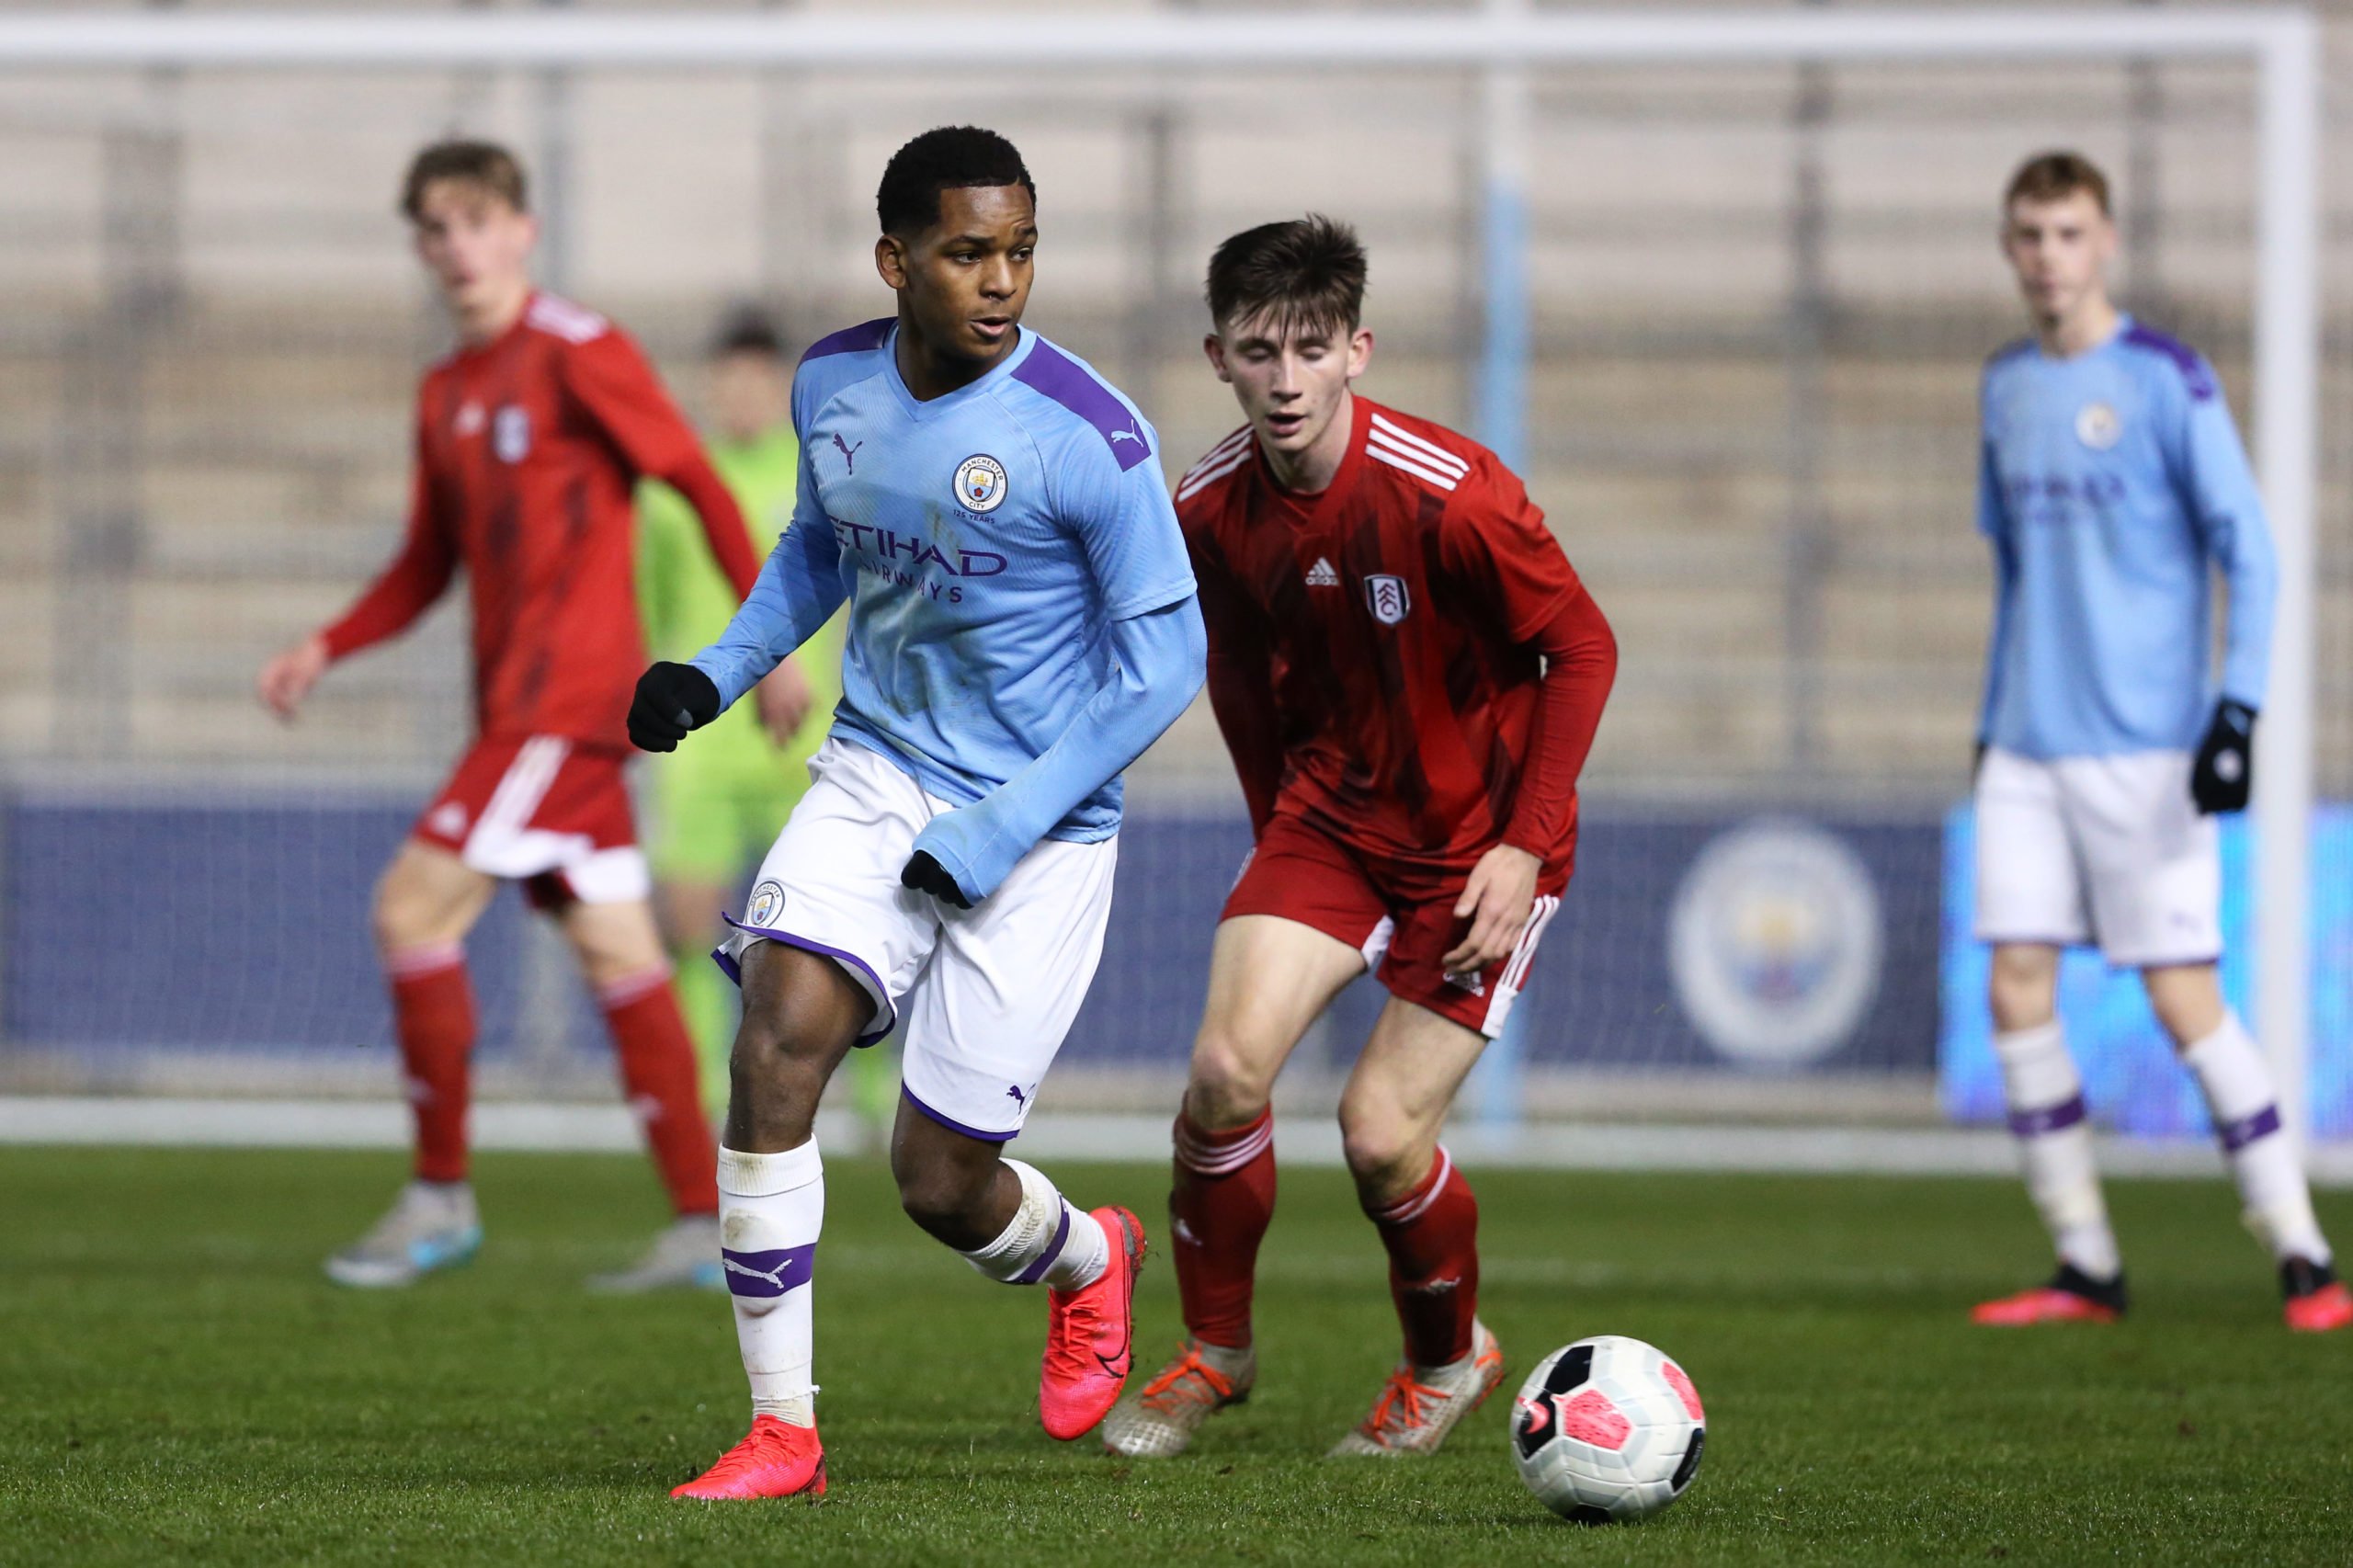 Manchester City's Braaf close to sealing a loan move to Italy (Braaf is in action in the photo)